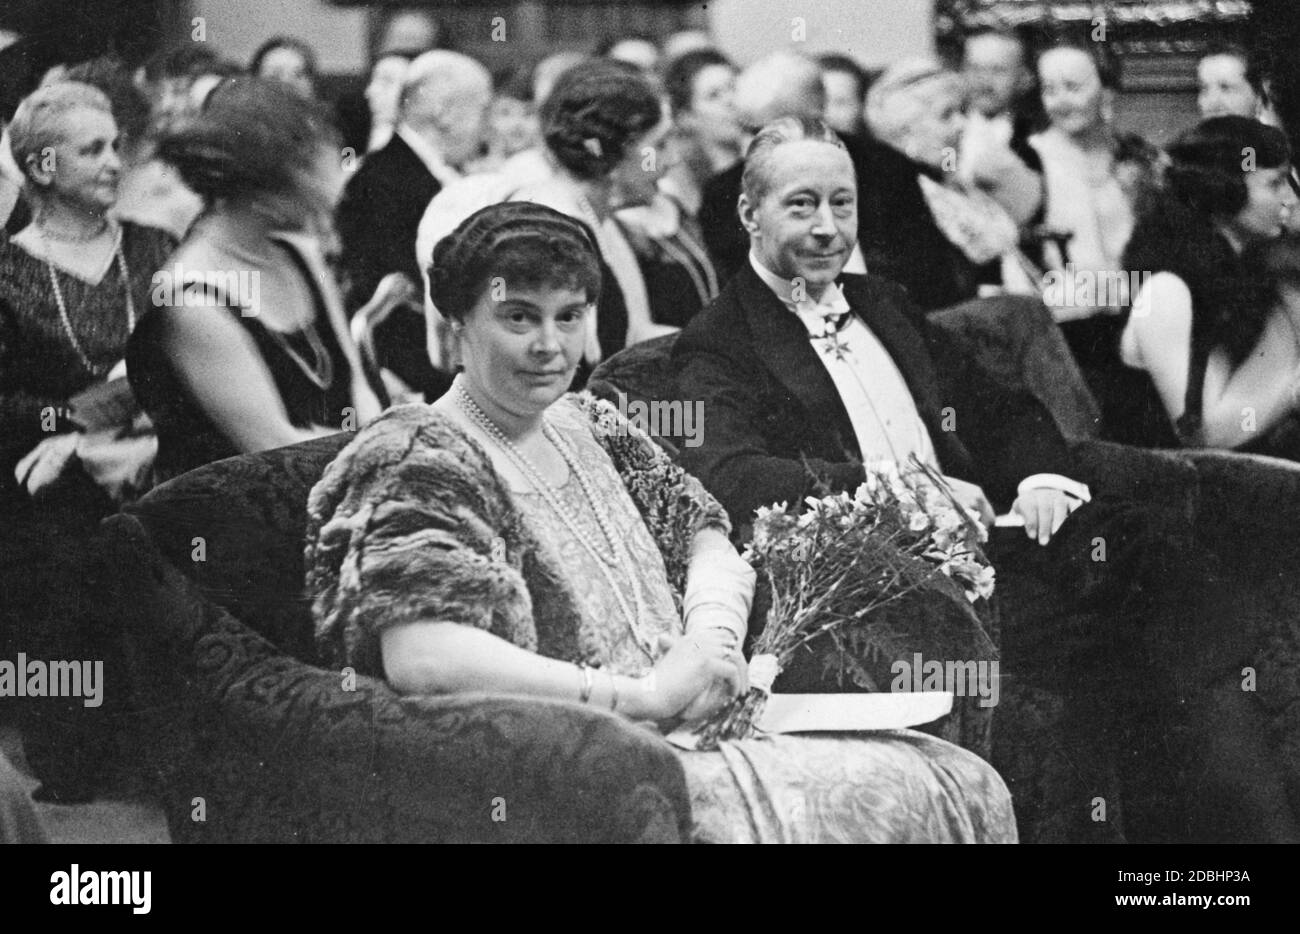 Crown Princess Cecilie of Mecklenburg together with her husband, Crown Prince Wilhelm of Prussia, at a social evening in Berlin in 1930. Stock Photo